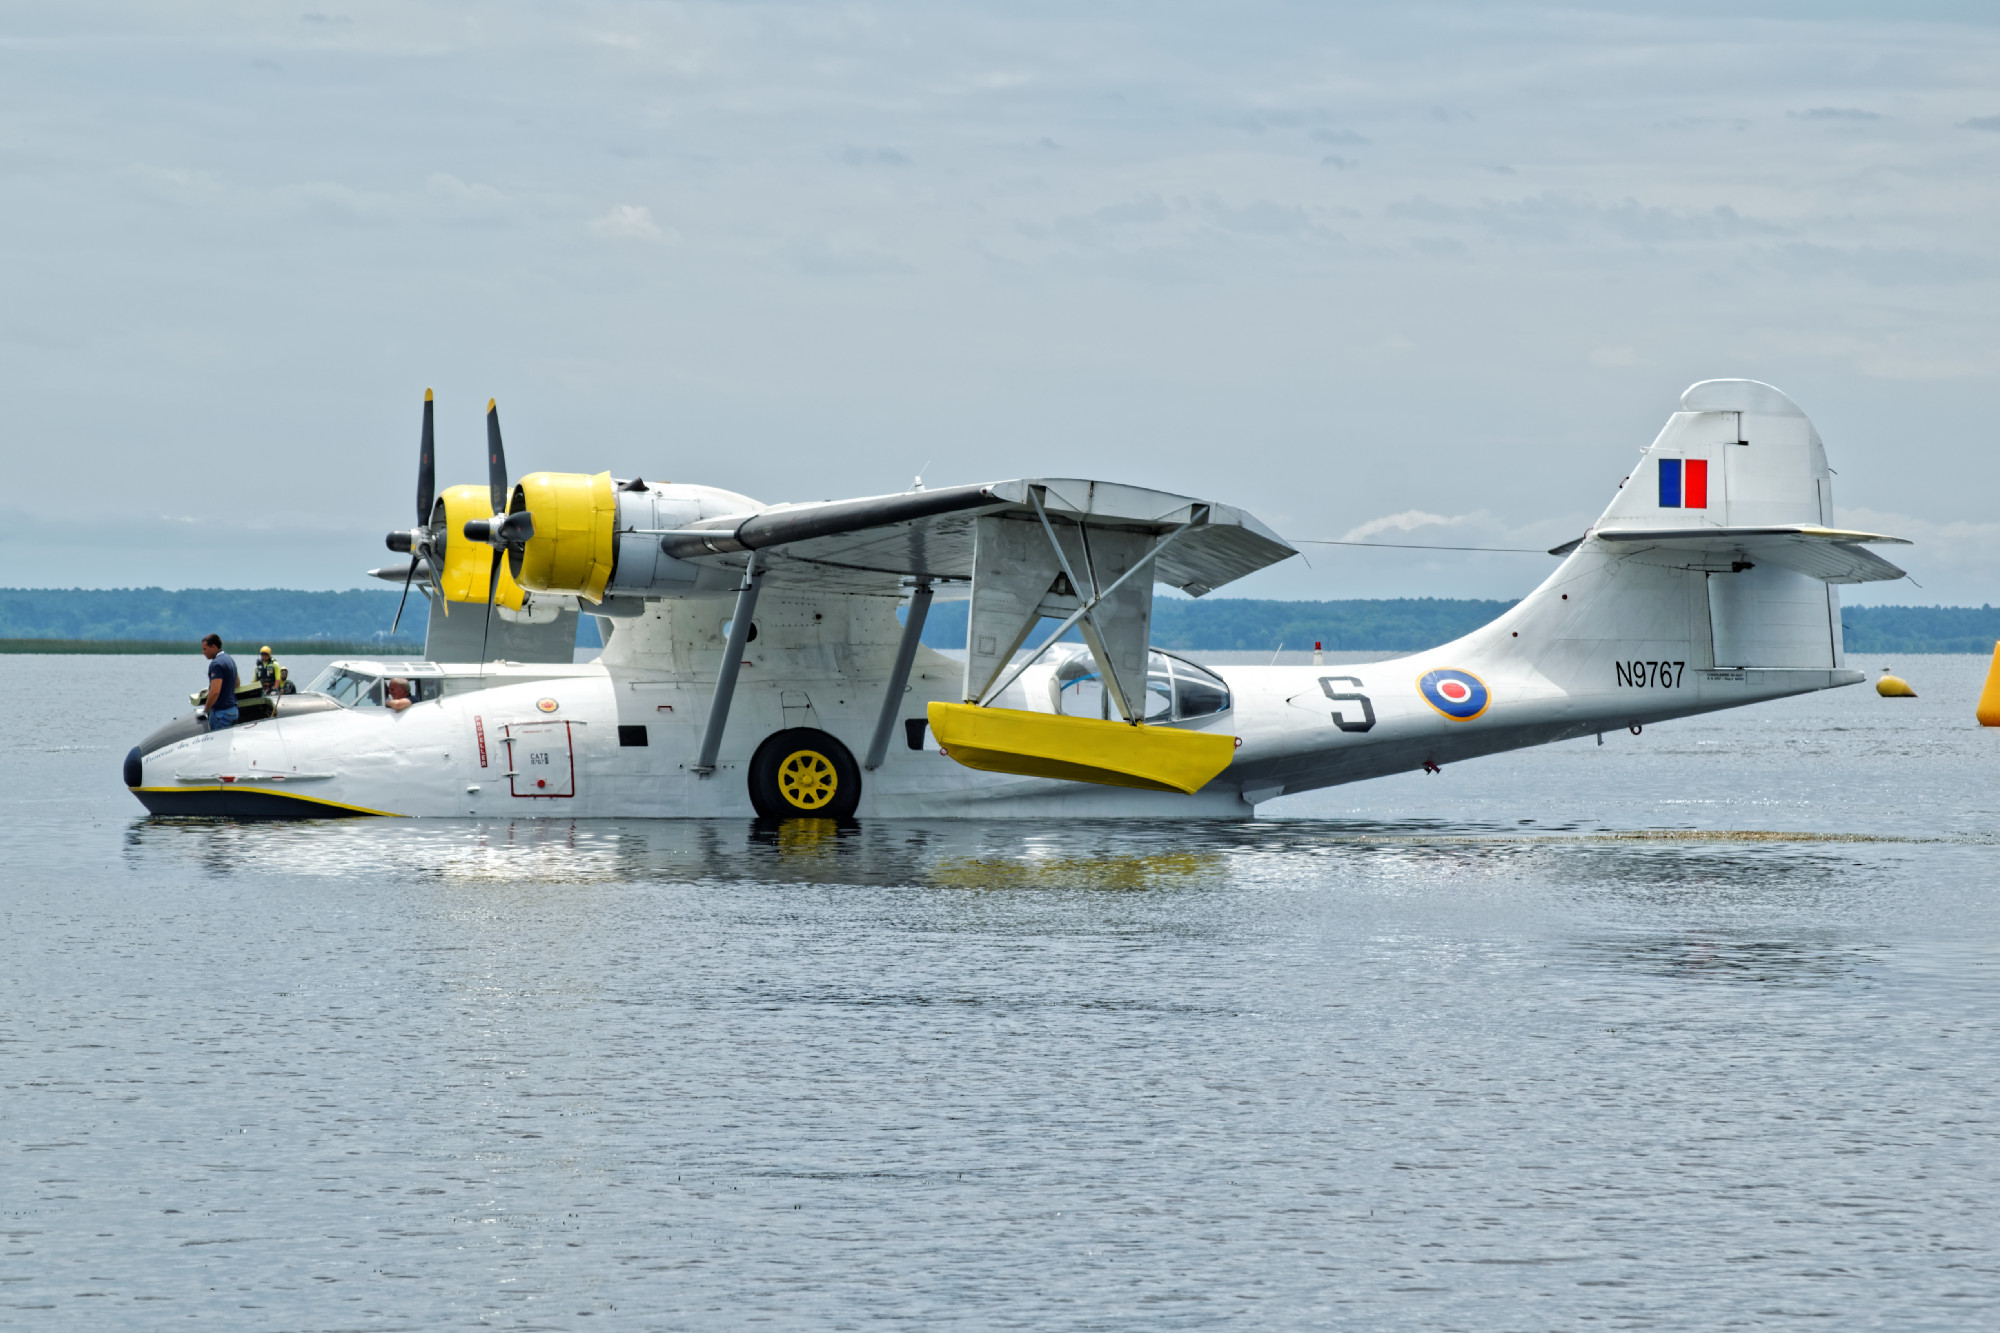 Consolidated_PBY_Catalina_-_N9767_%2840900048980%29.jpg